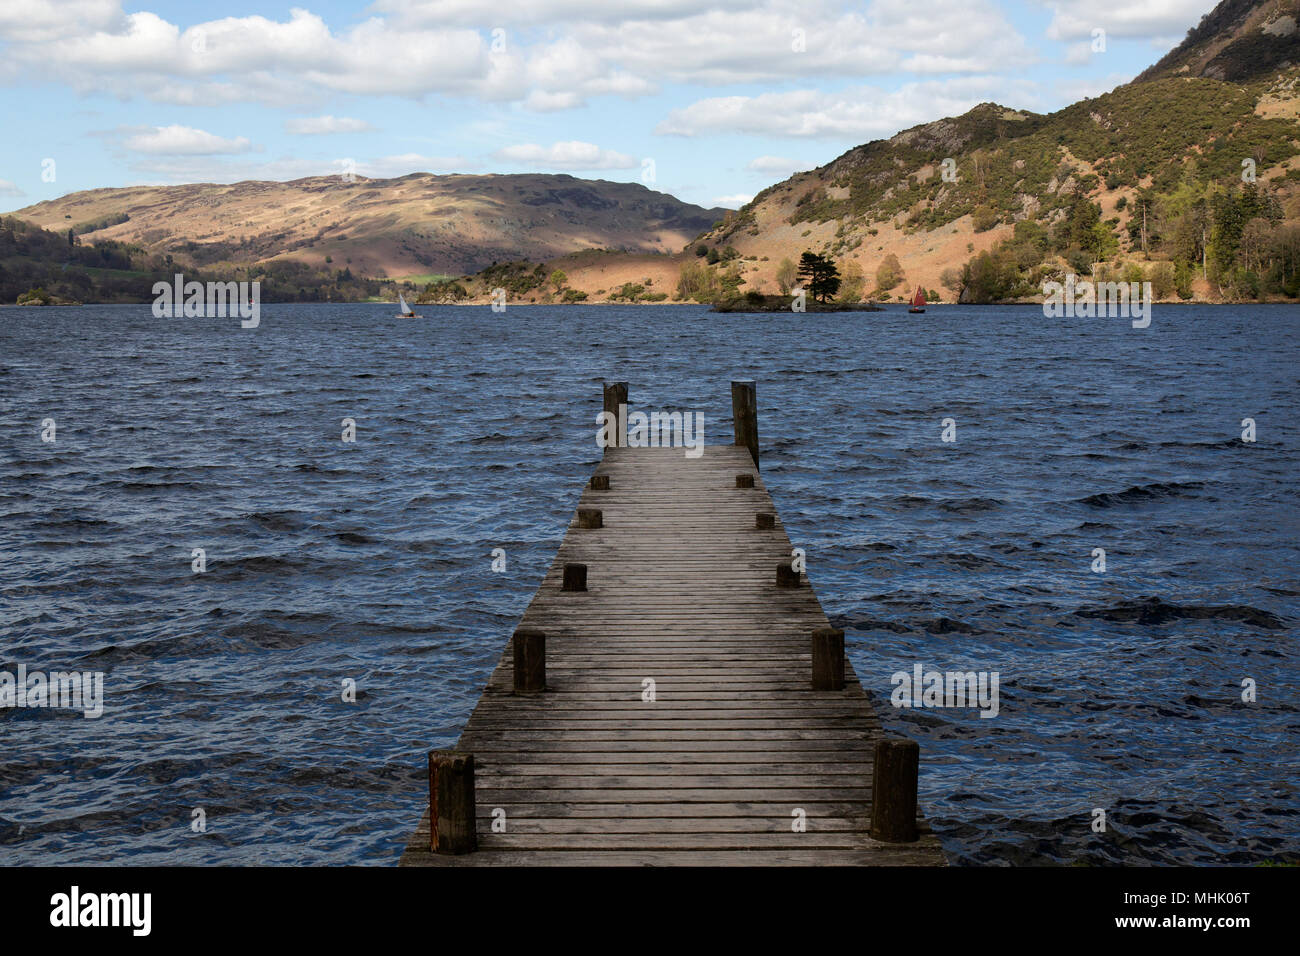 A jetty on the shore of Ullswater, one of the lakes in the Lake District National Park in England. Stock Photo